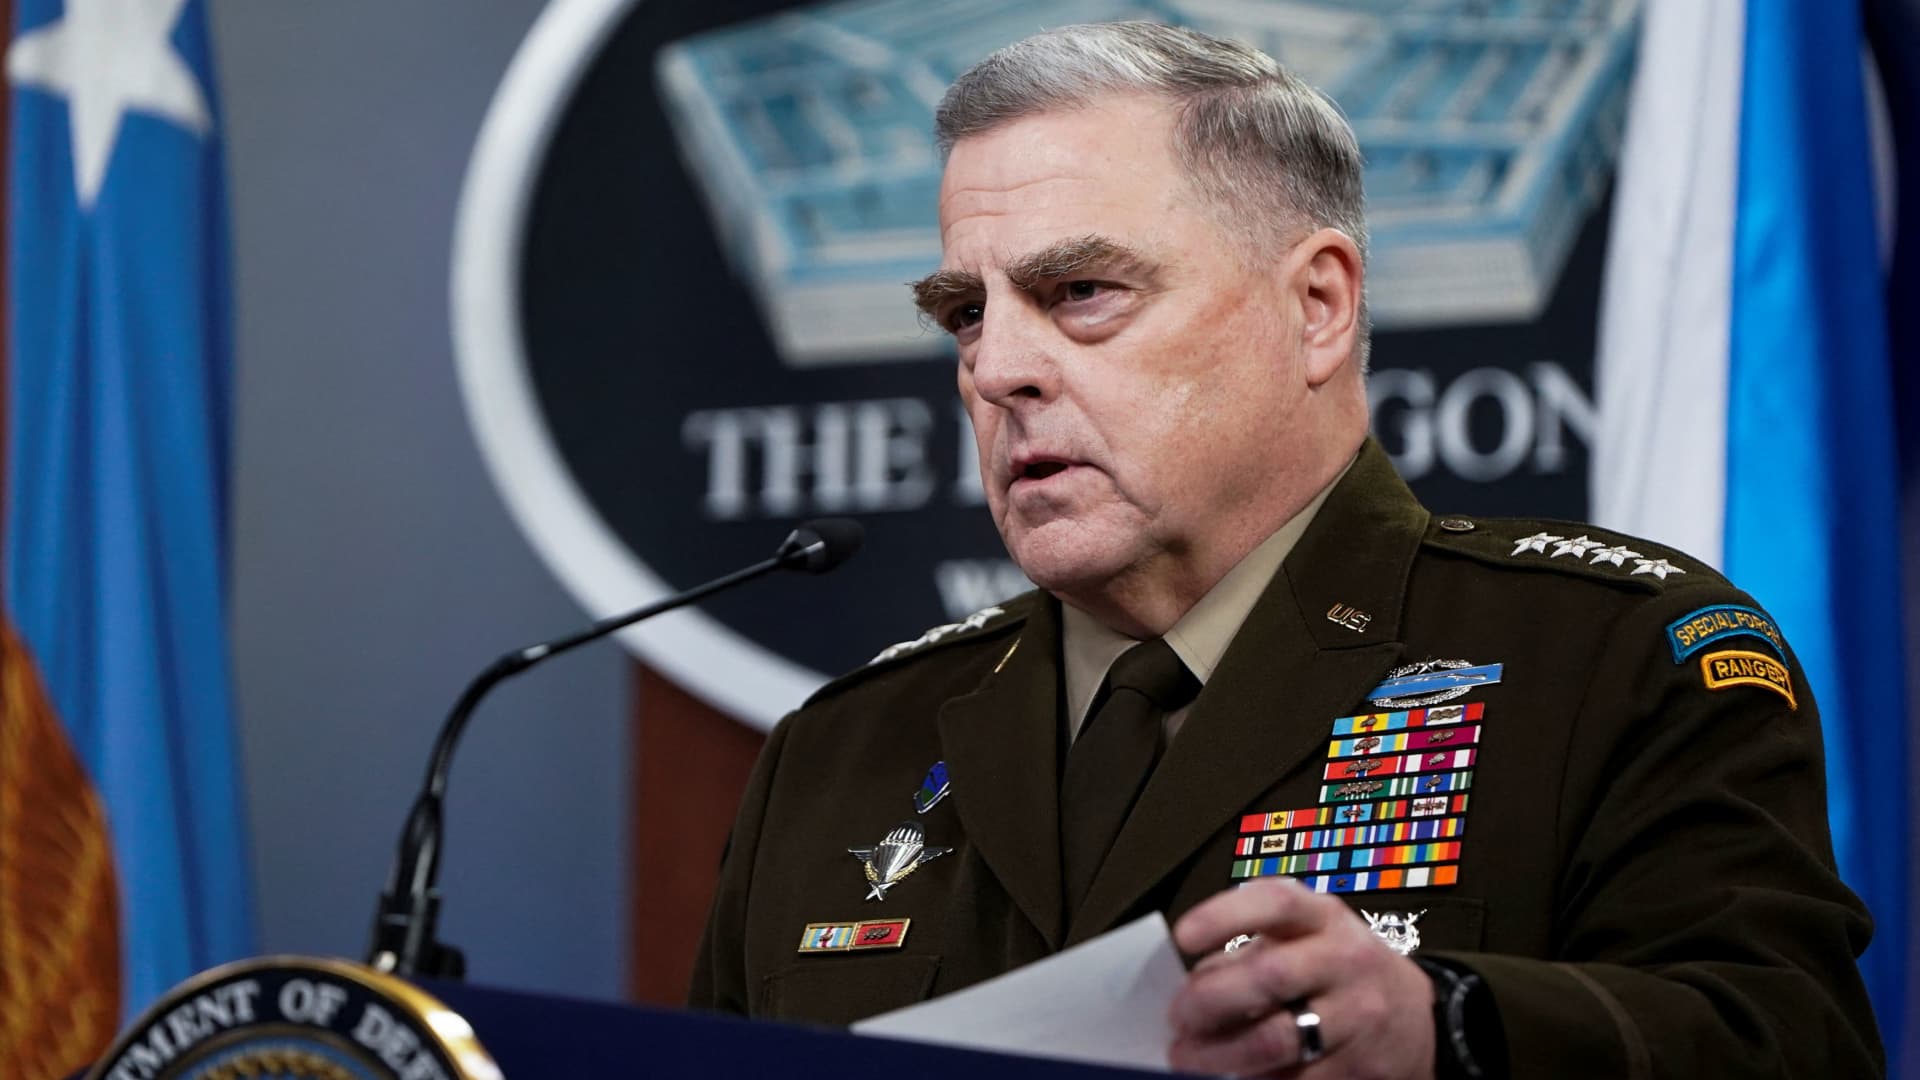 General Mark Milley, Chairman of the U.S. Joint Chiefs of Staff, answers questions from reporters about Russia and the crisis in the Ukraine during a news conference at the Pentagon in Washington, U.S., January 28, 2022.